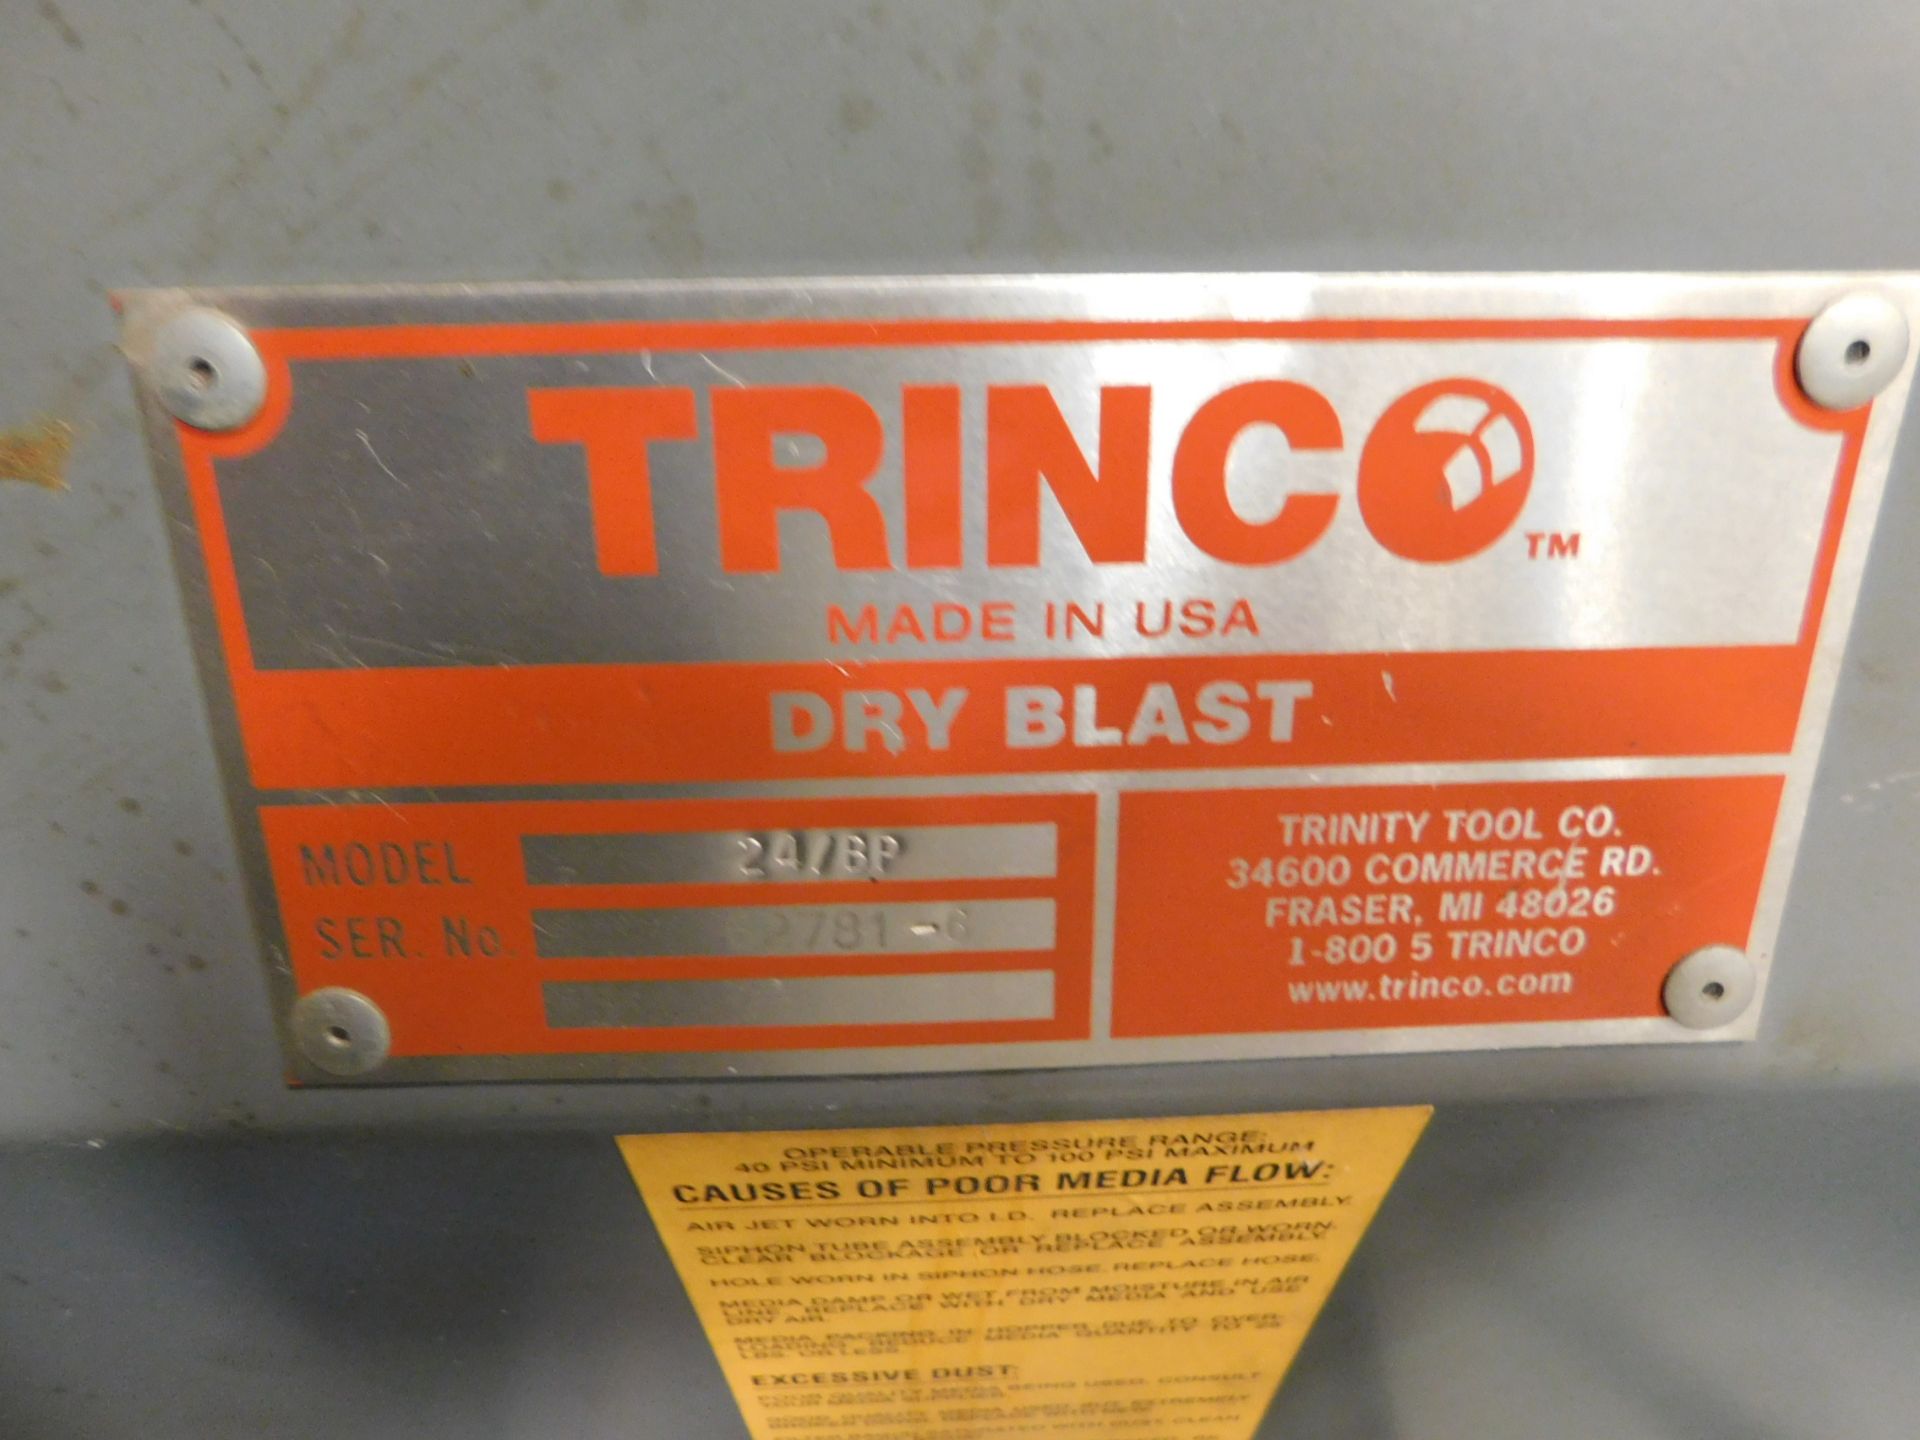 Trinco Model 24/BP Dry Blast Cabinet with Reclaimer - Image 4 of 5